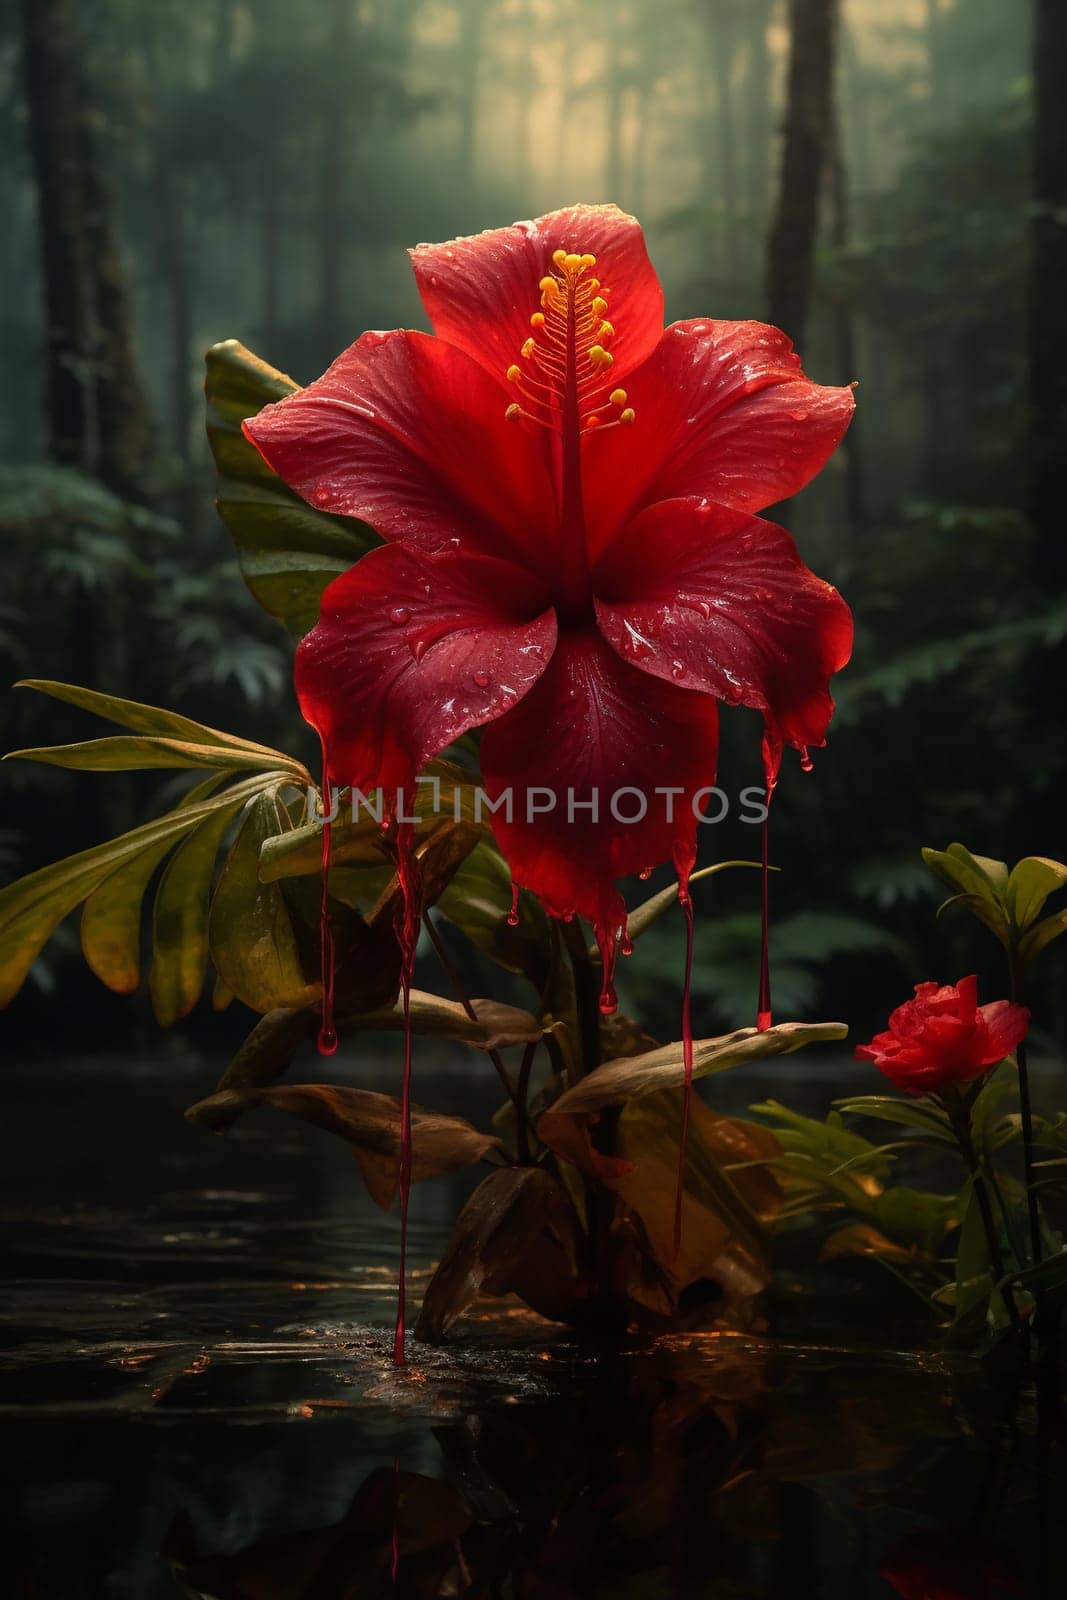 Tropical Rainforest Beauty: Vibrant Hibiscus Blossom by the Water by Raulmartin